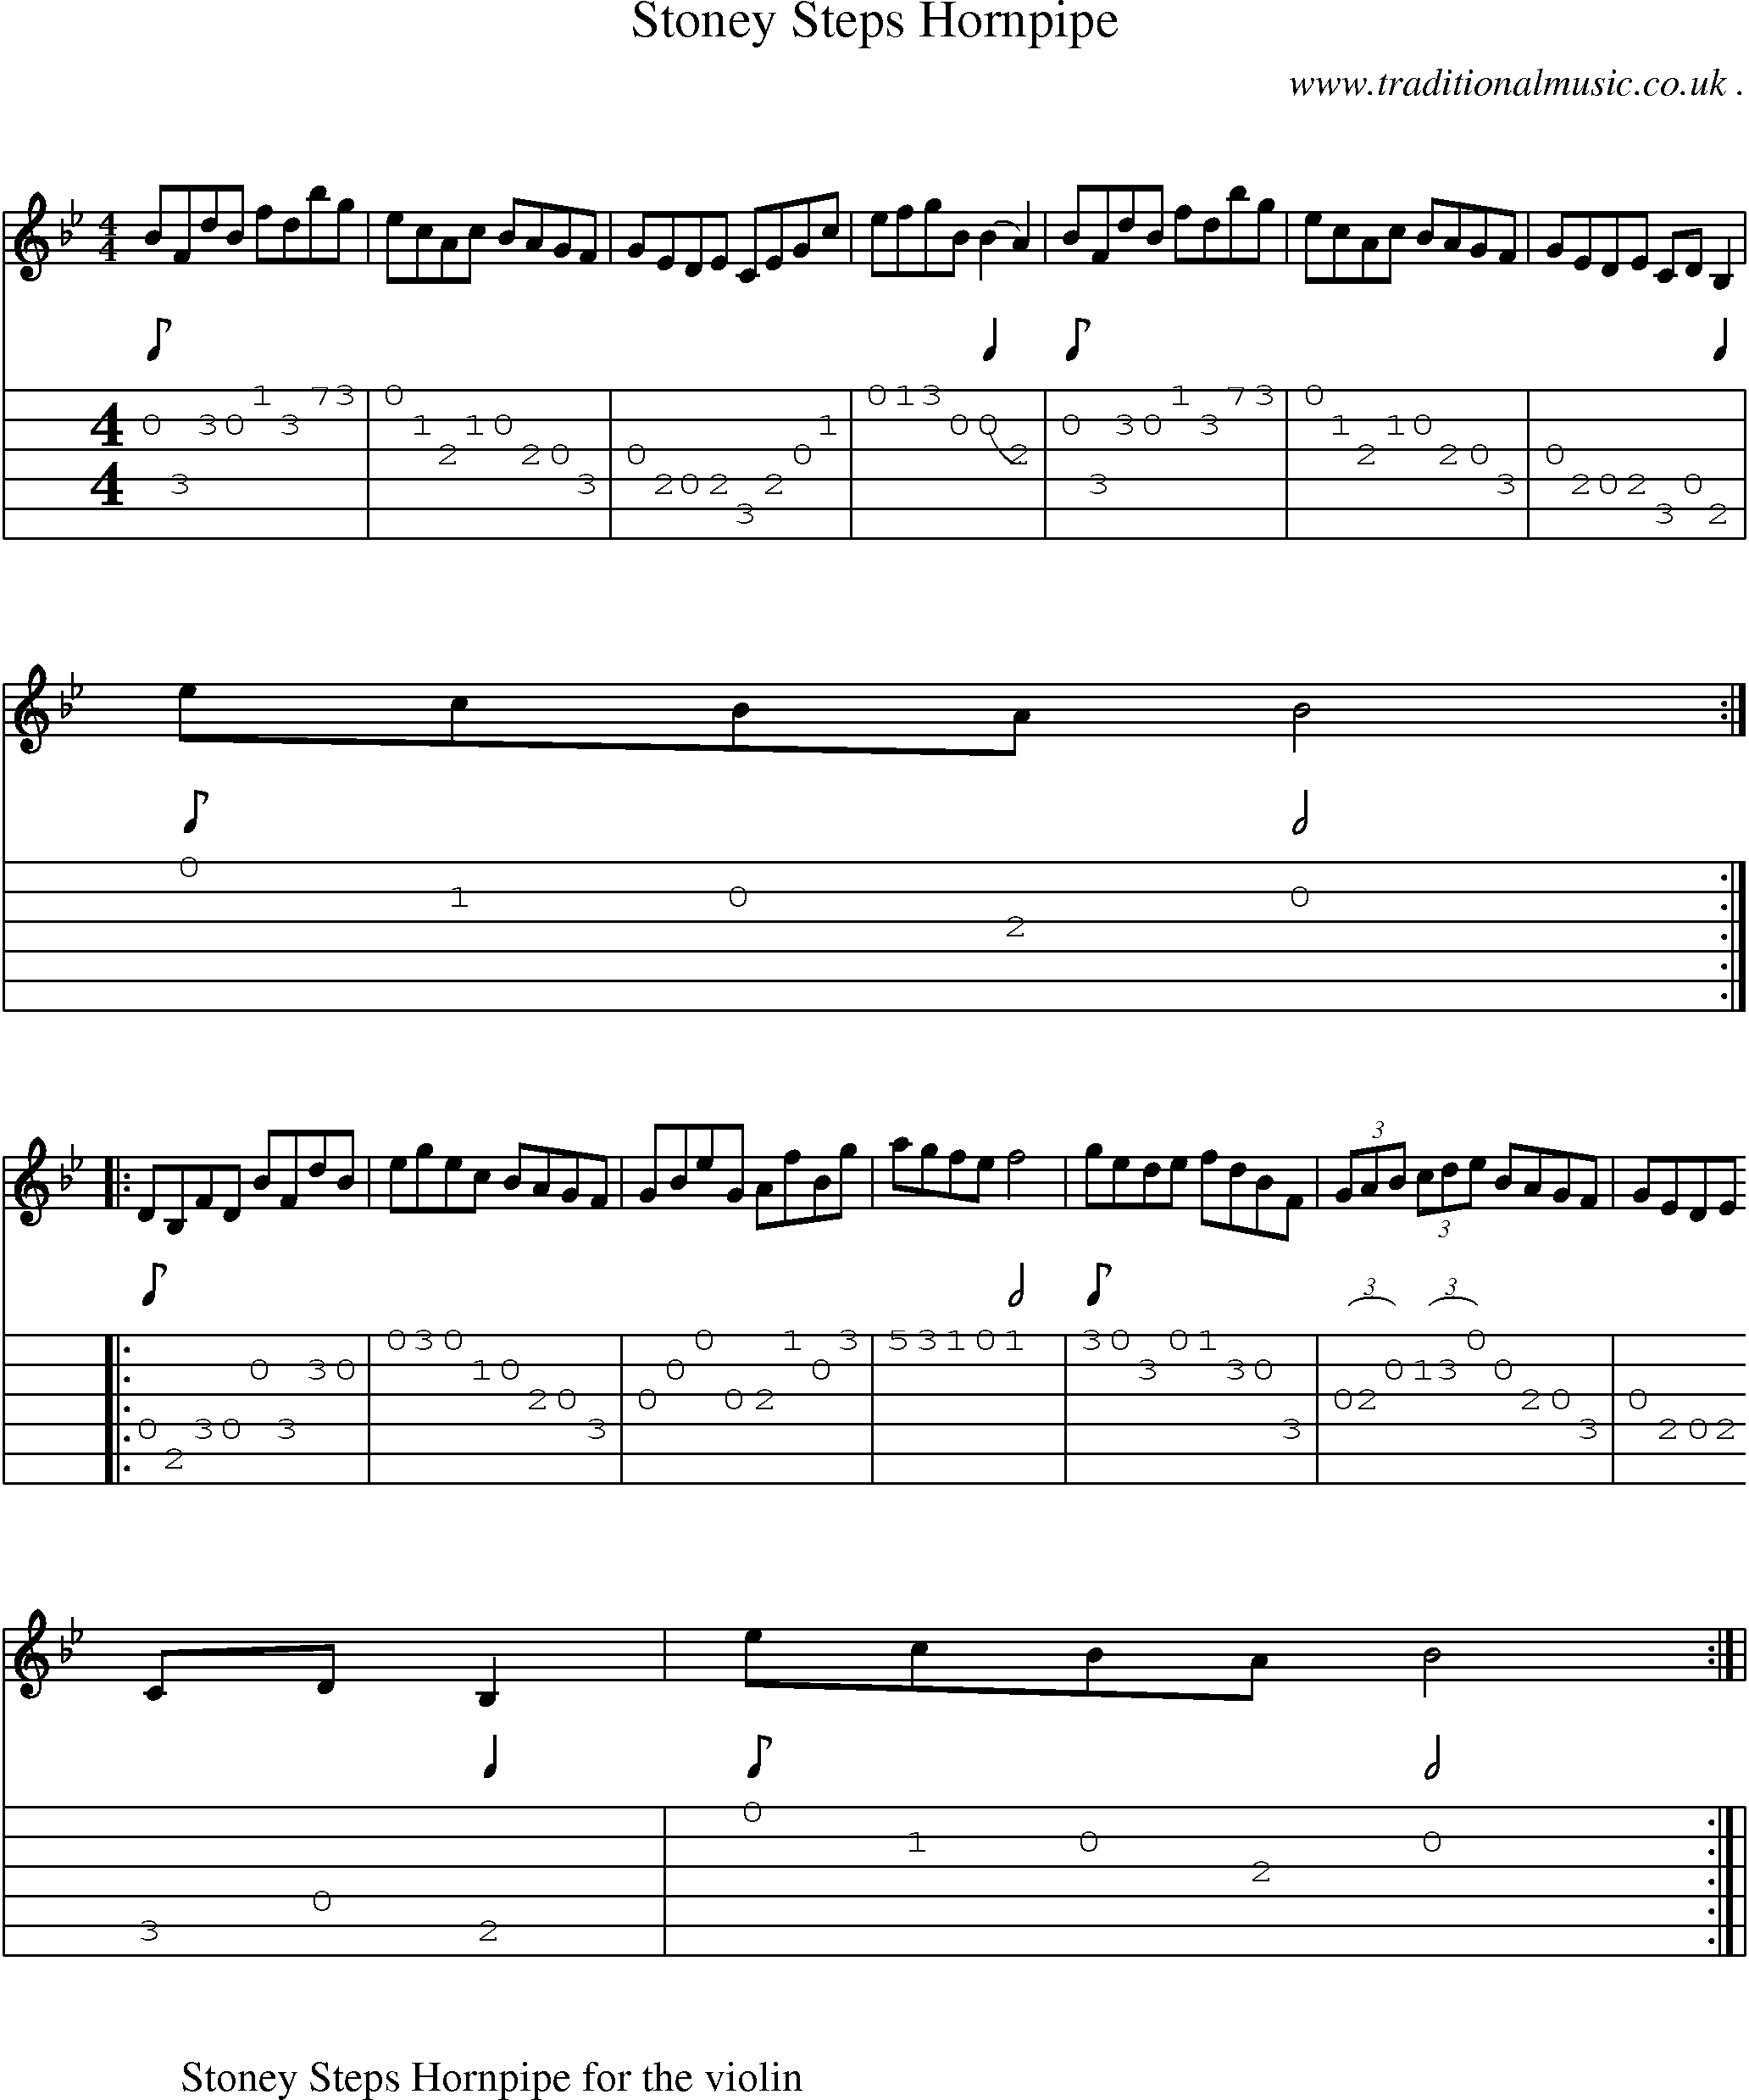 Sheet-Music and Guitar Tabs for Stoney Steps Hornpipe